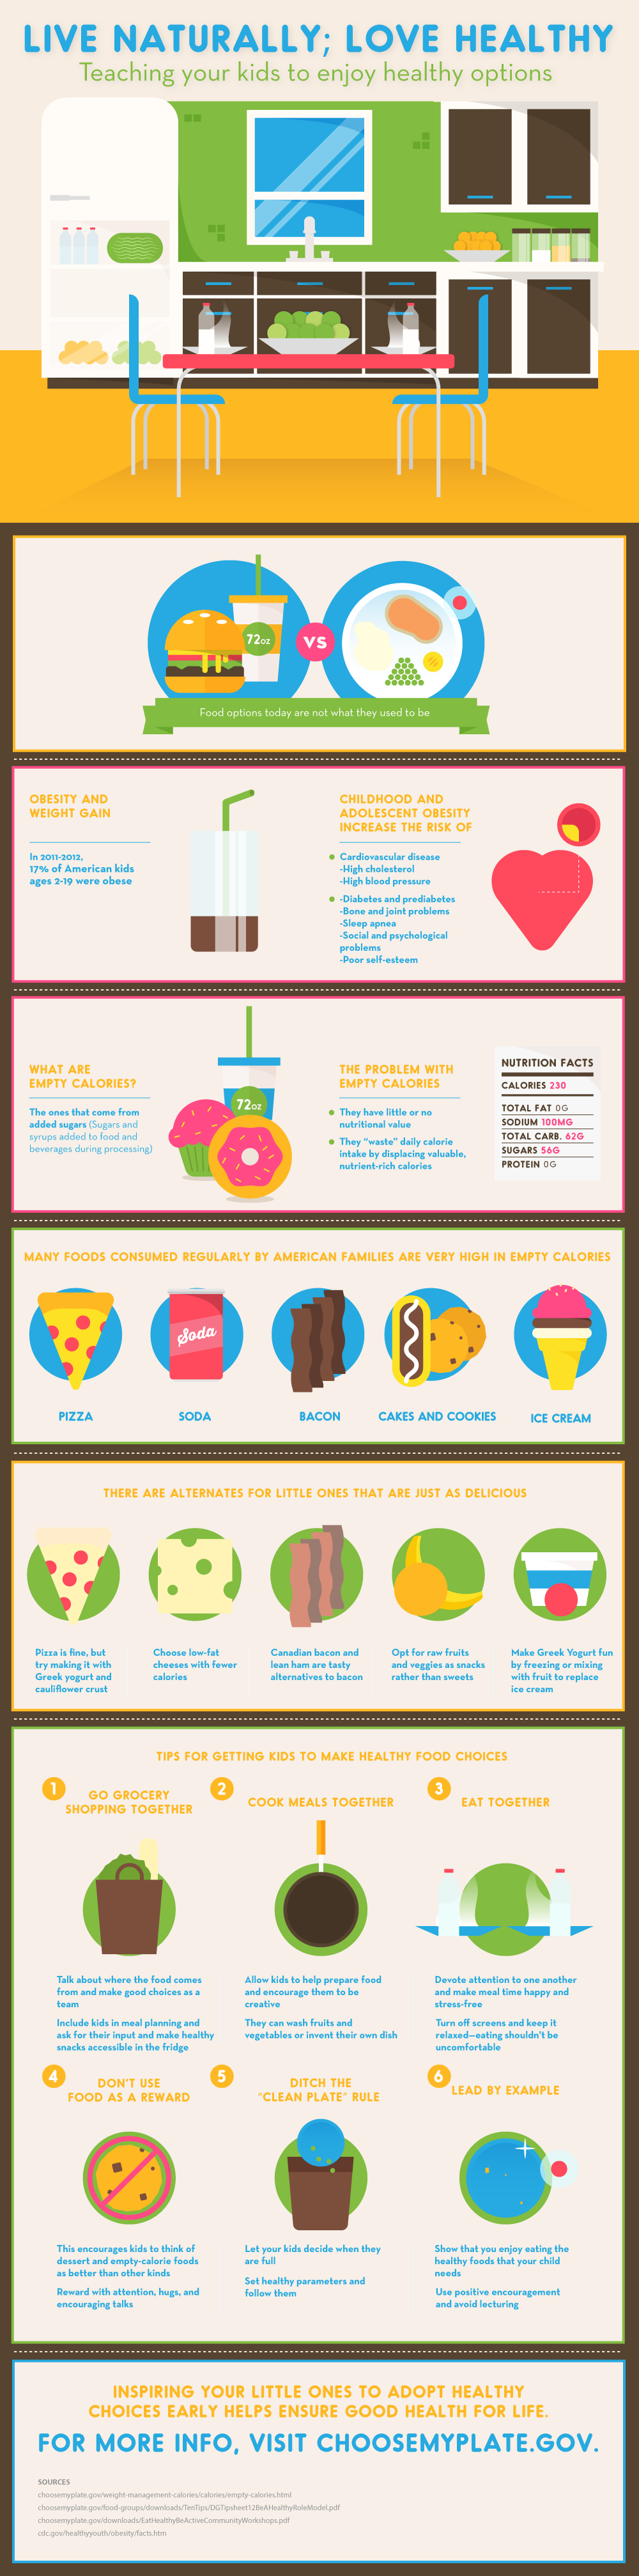 Help Your Kids Make Healthy Food Choices Infographic